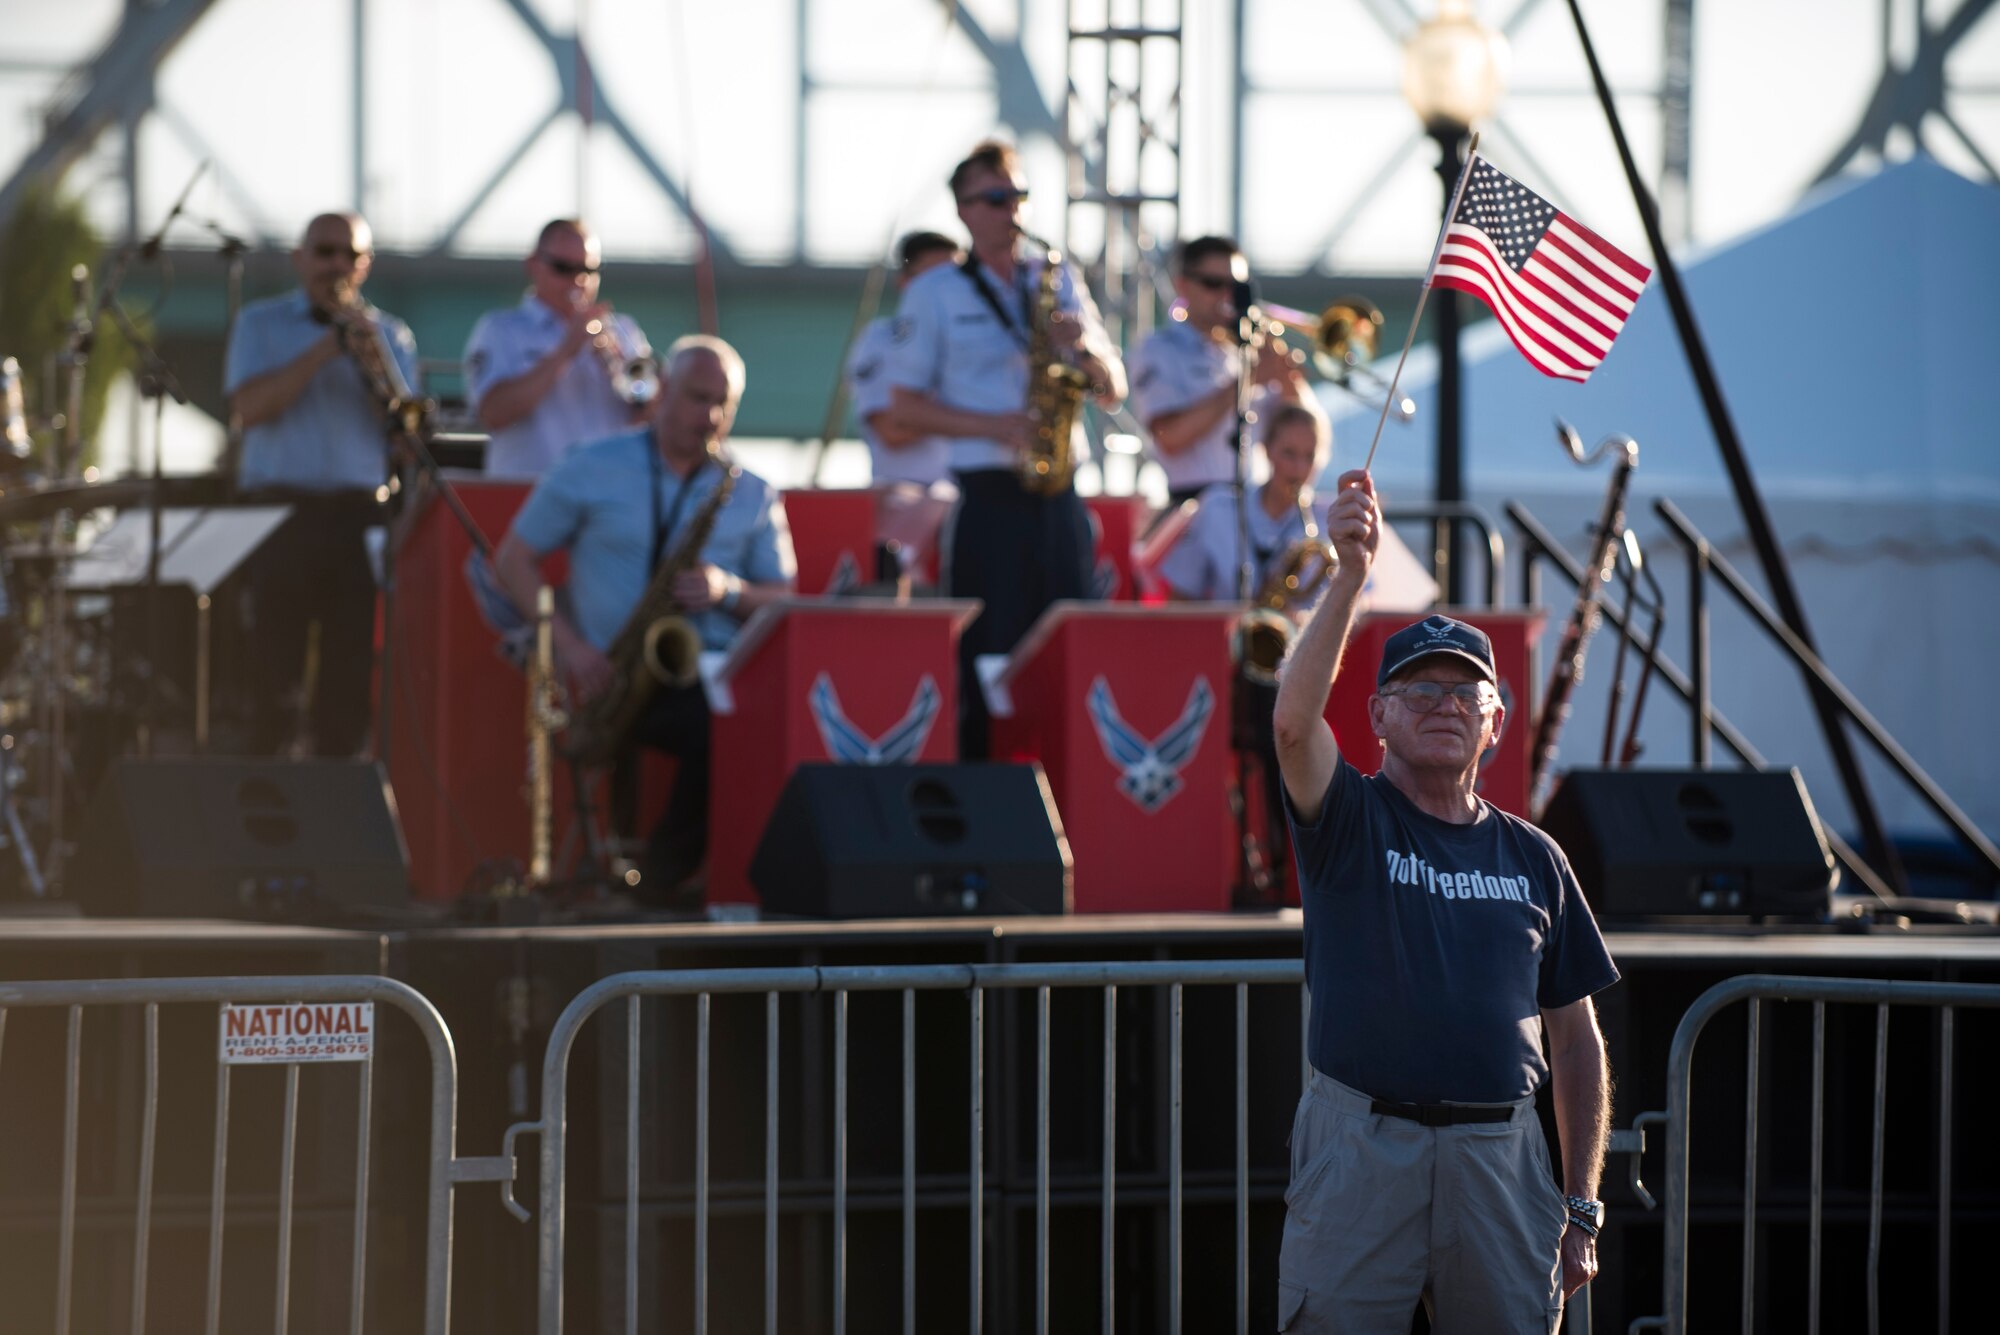 Man holding flag in front of stage where Jazz ensemble is  playing